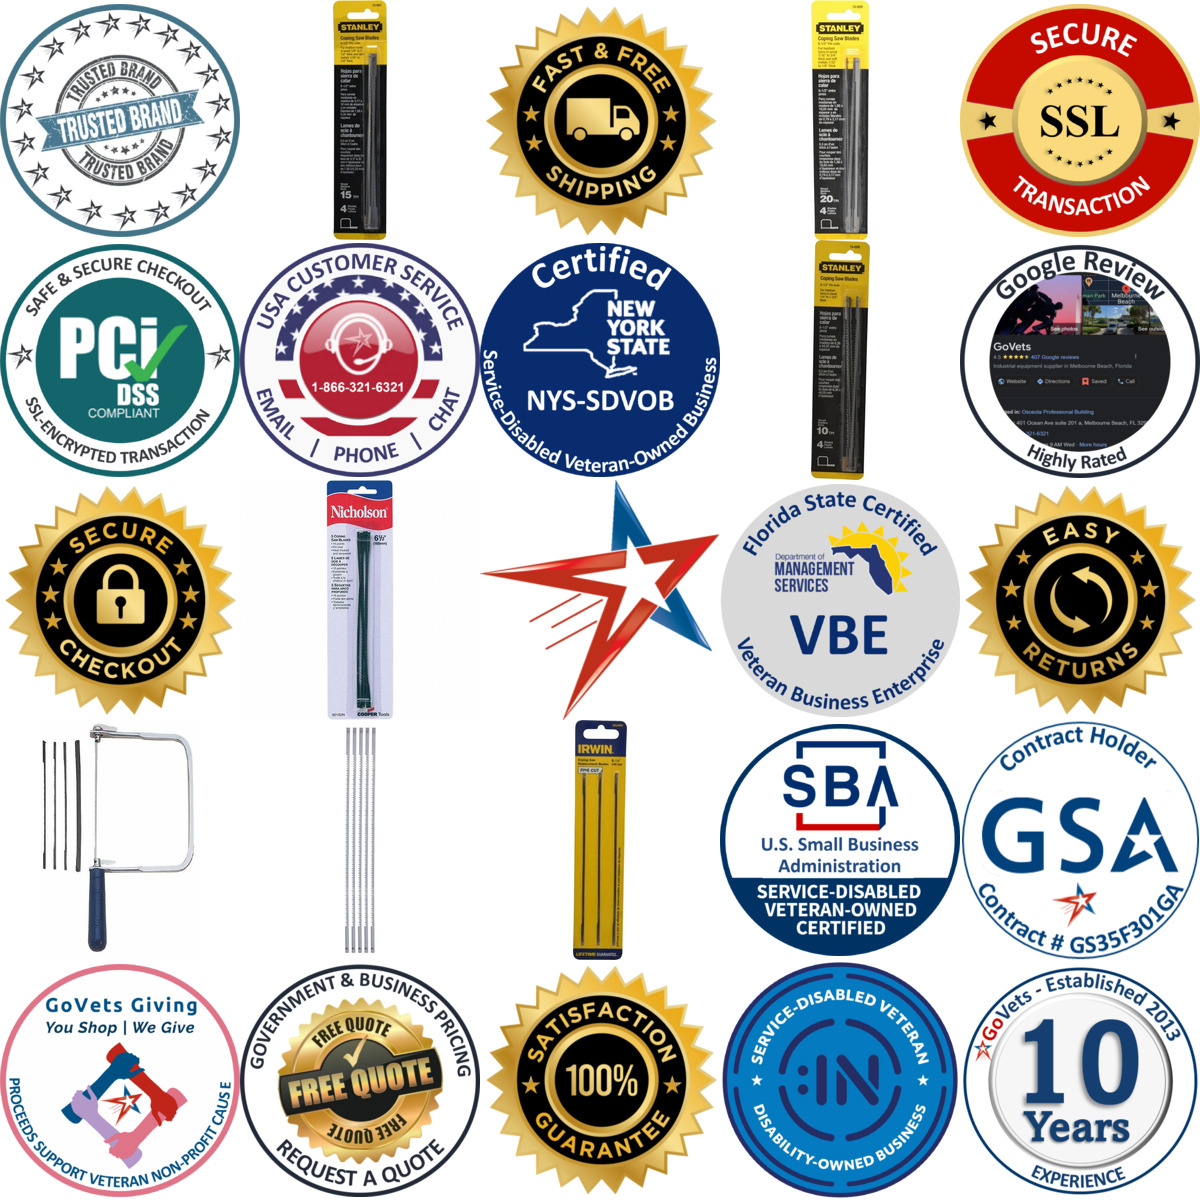 A selection of Jewelers and Coping Saw Blades products on GoVets